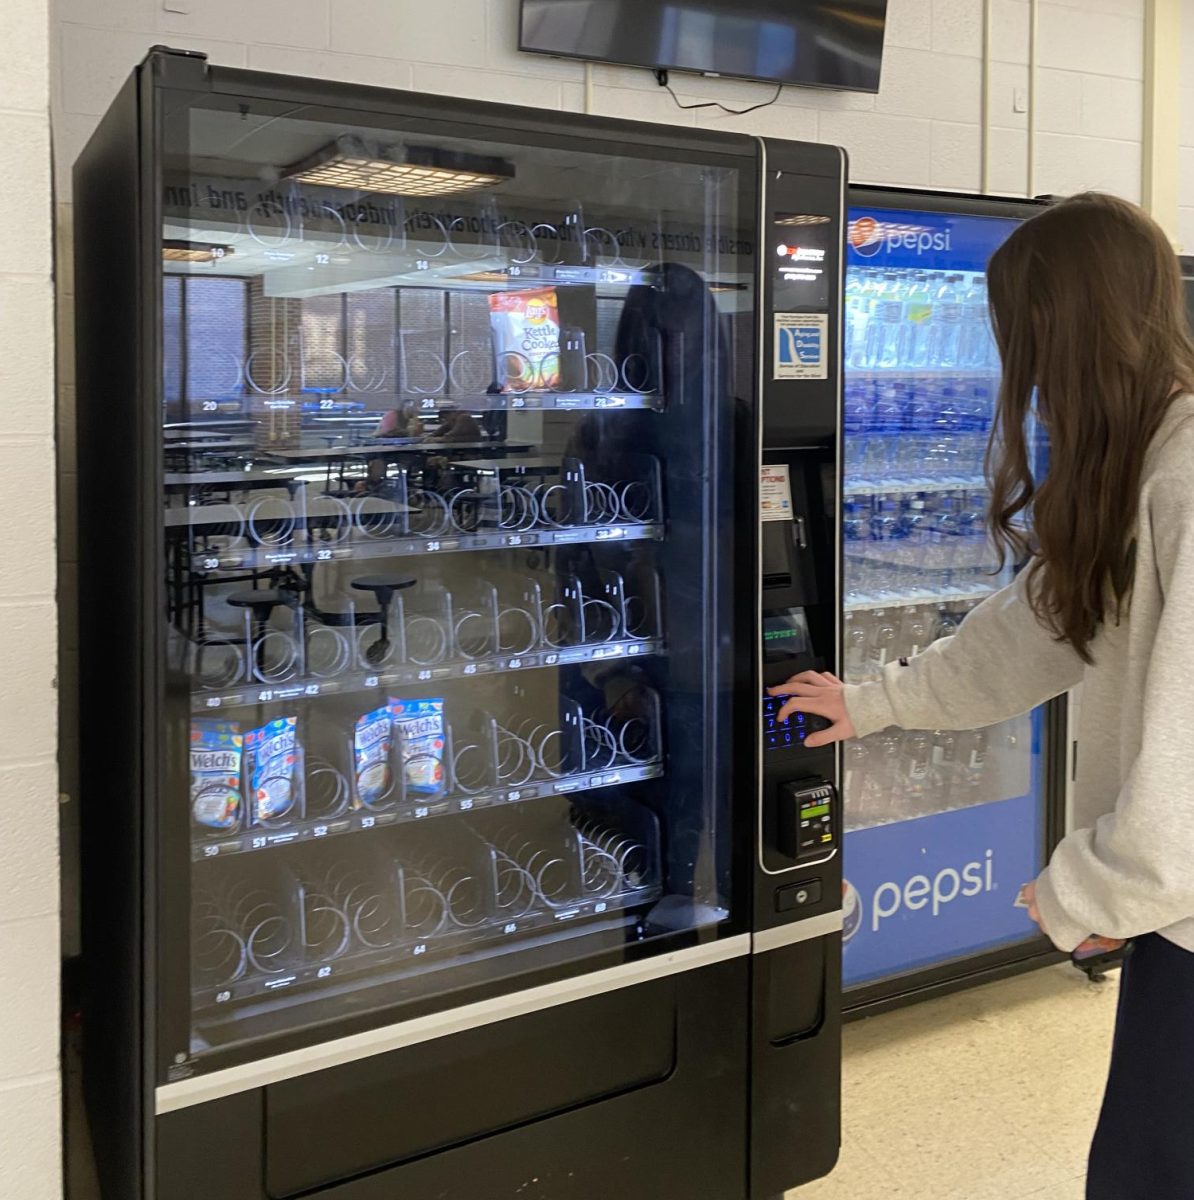  The vending machine only being available to students after 1:30 makes it so that students are forced to buy school cafeteria snacks that are not as good and have fewer selections. 